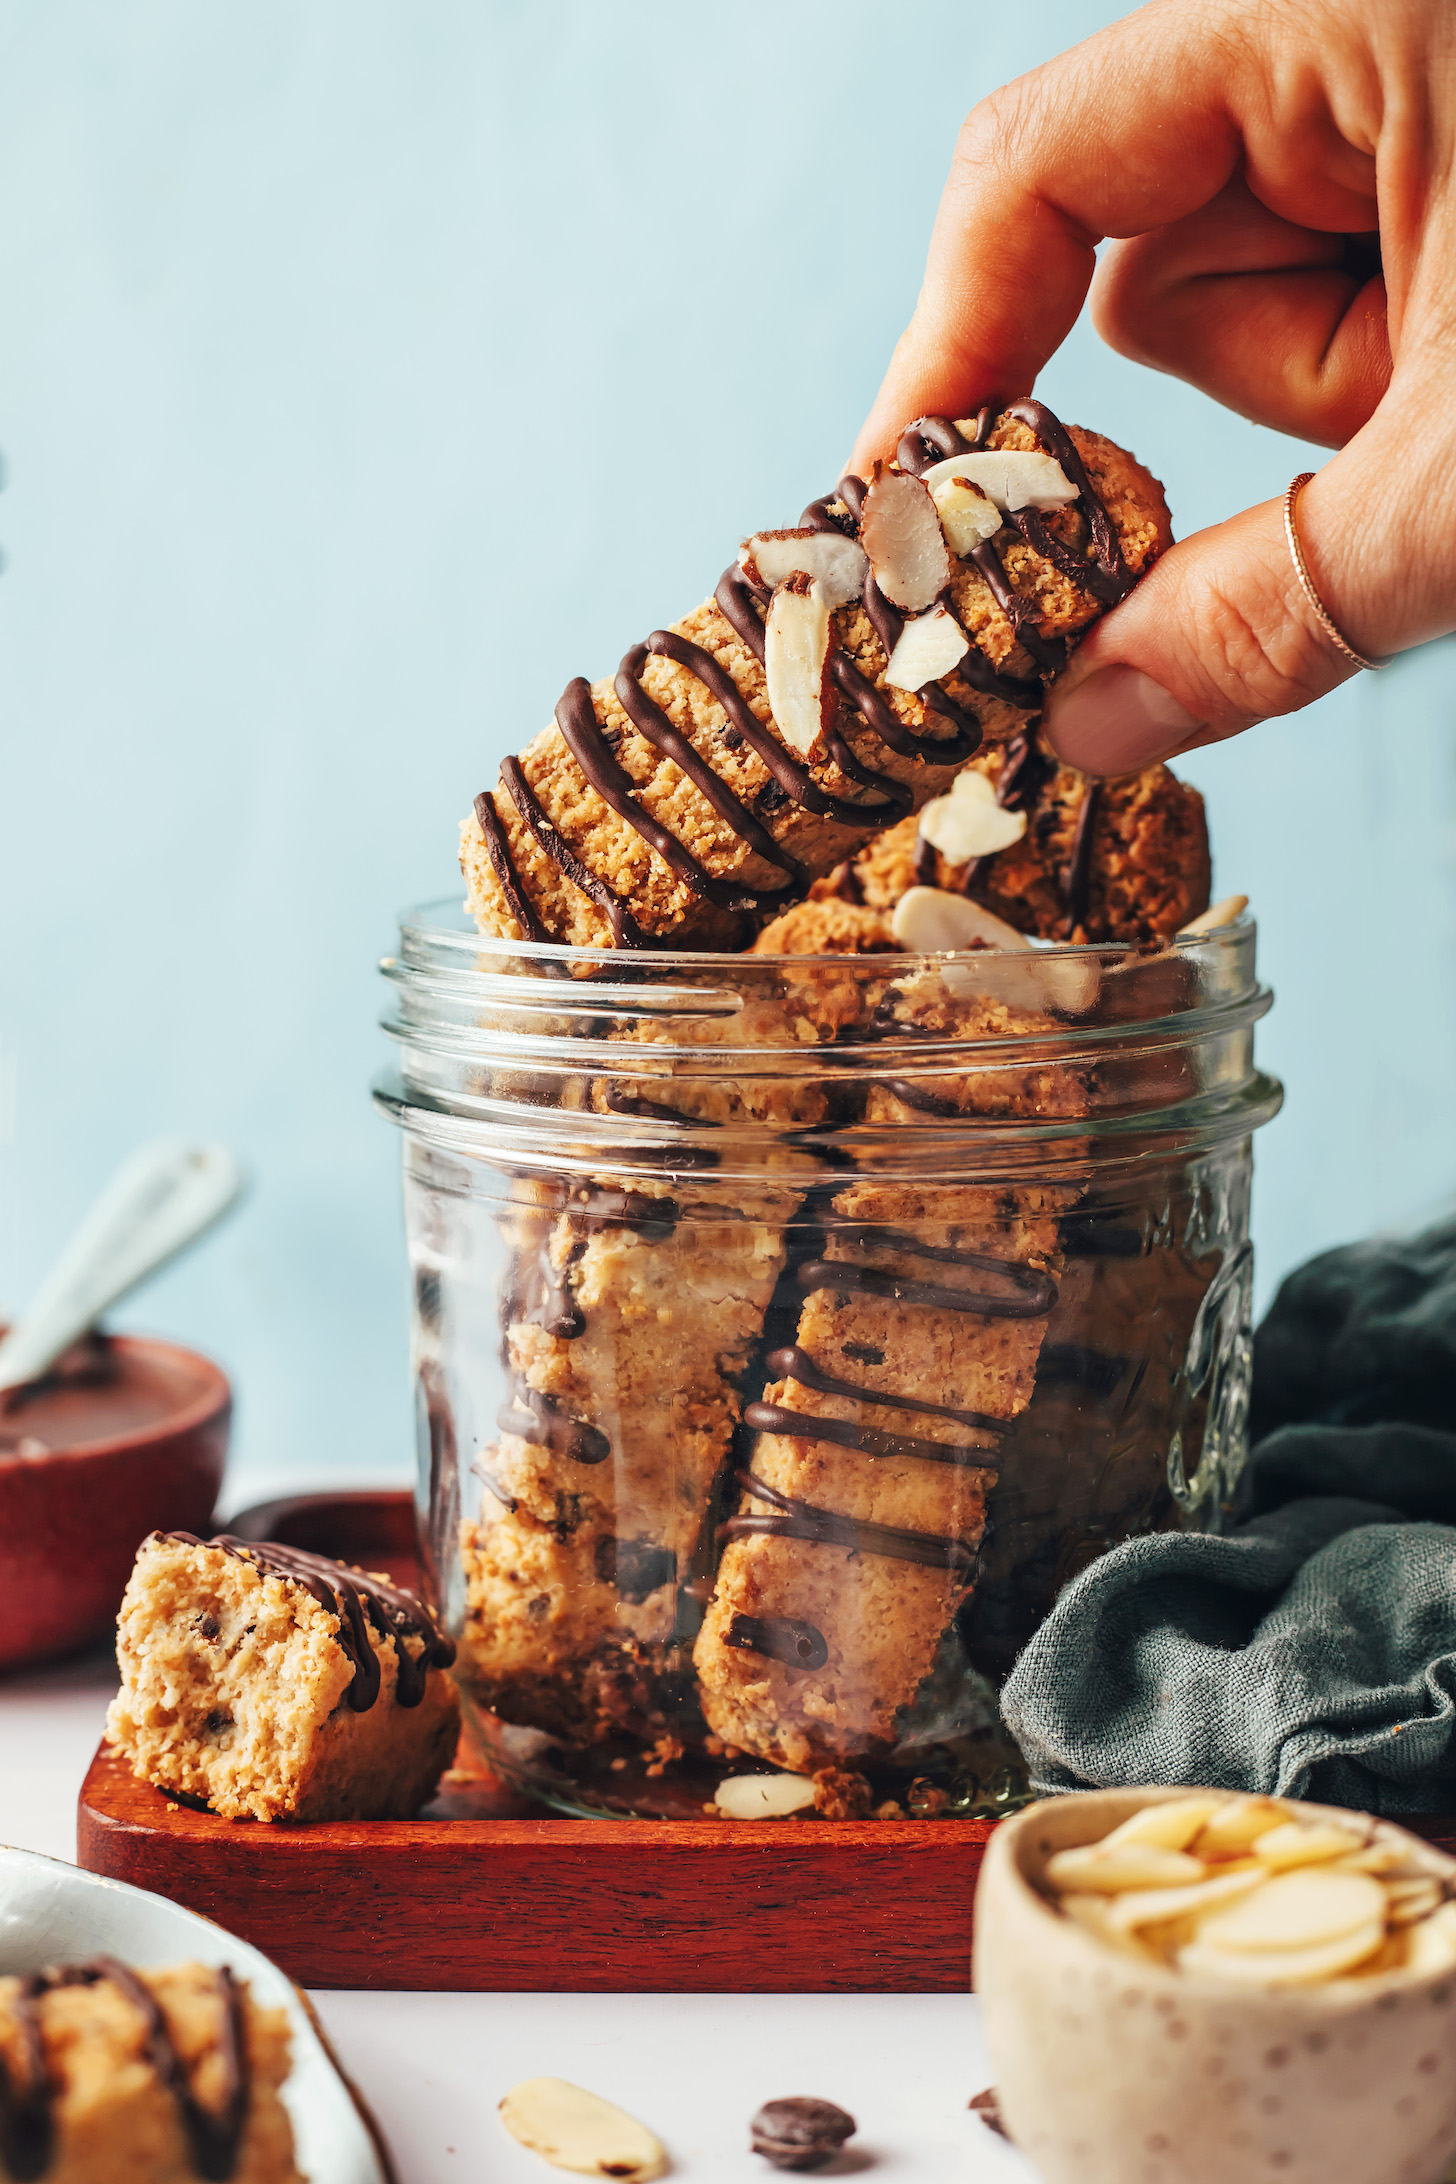 Holding a chocolate-drizzled almond biscotti over a jar with more biscotti